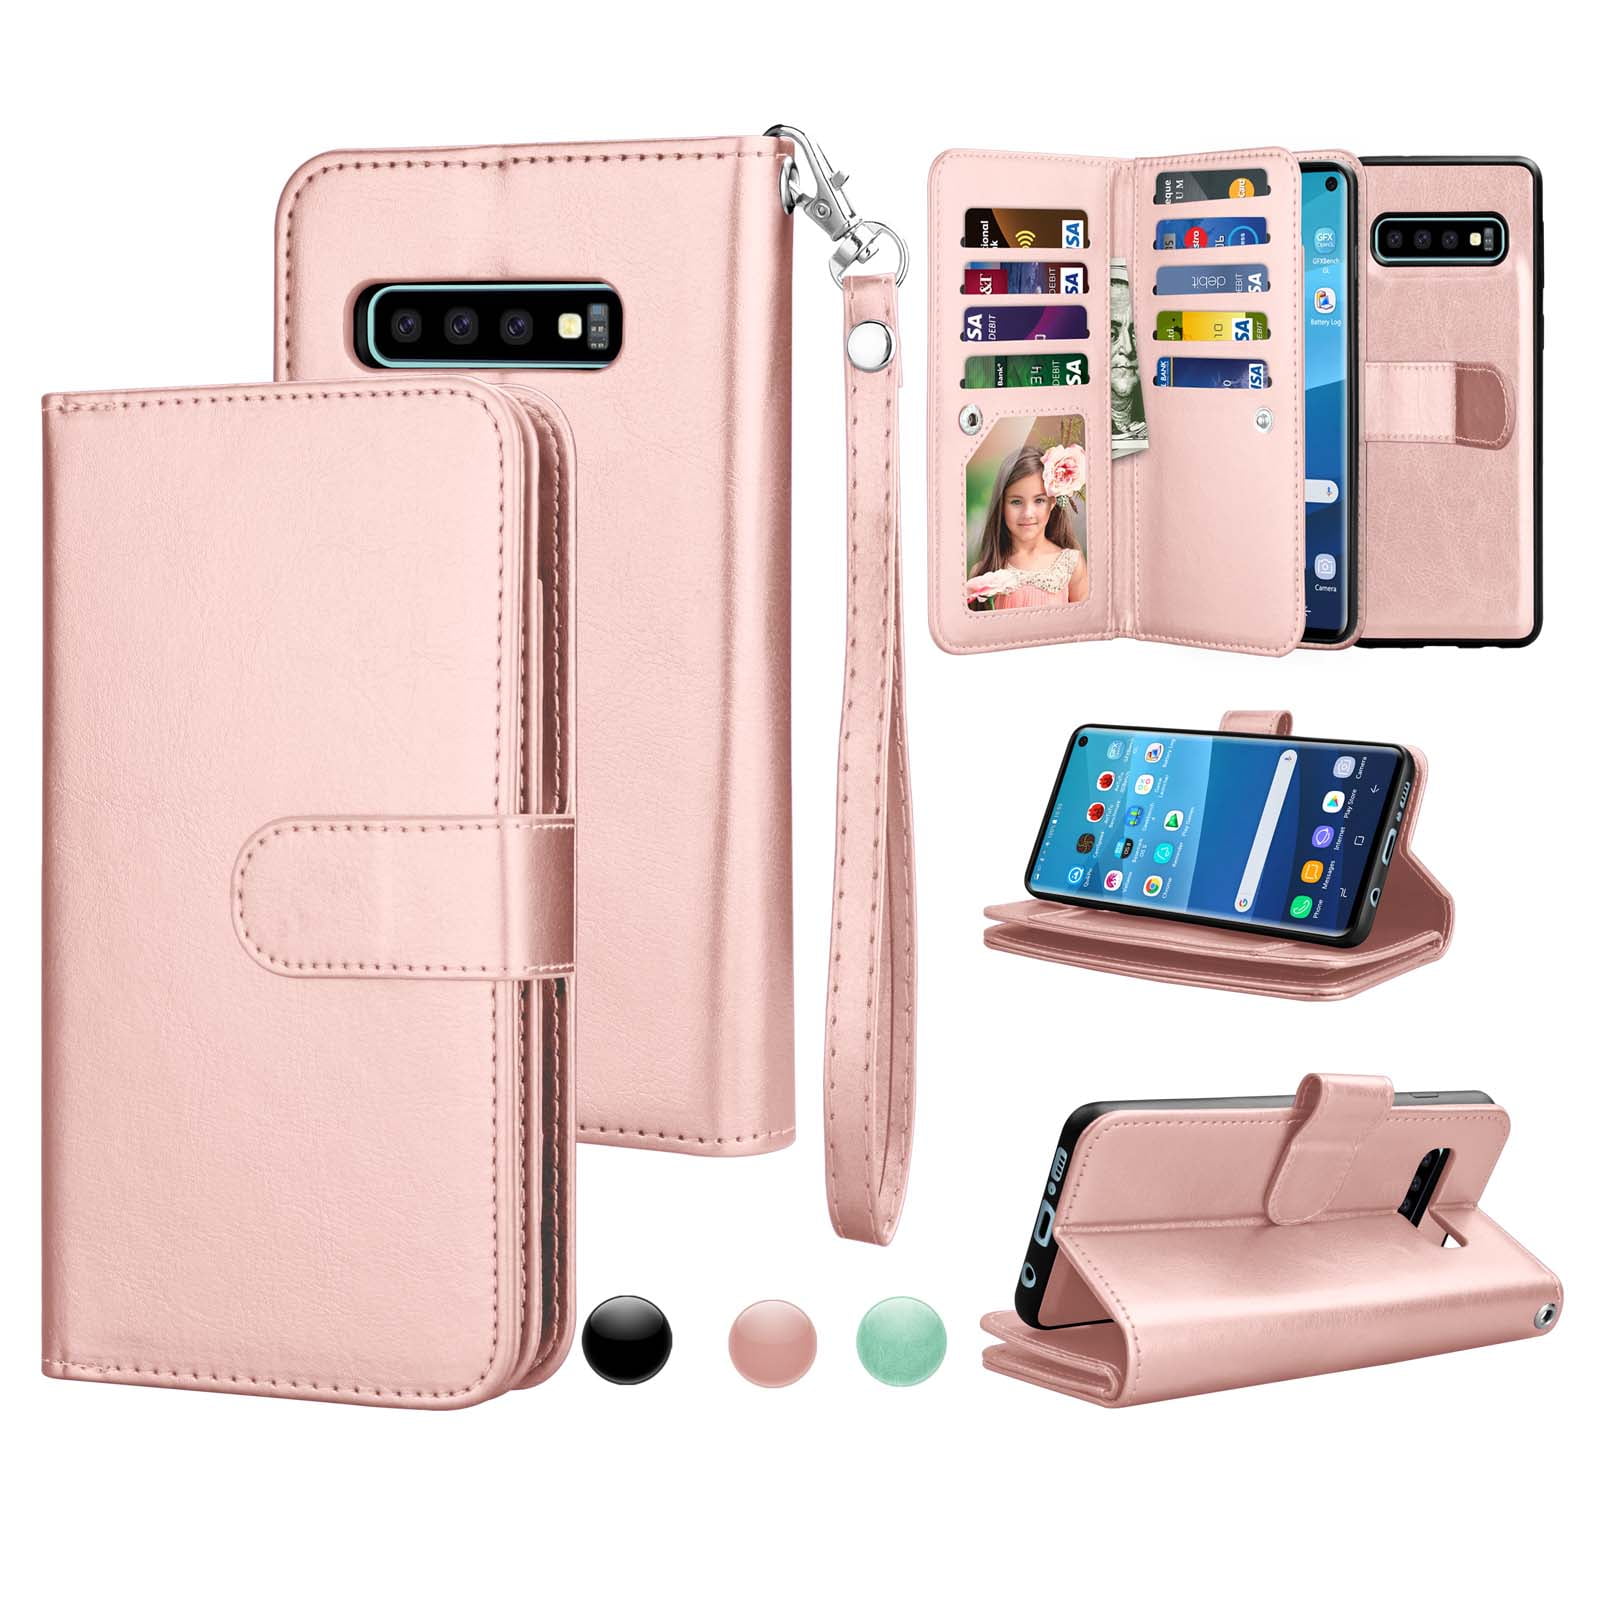 Compatible with Samsung Galaxy S10 Case,PHEZEN Galaxy S10 Wallet Case,Emboss Pineapple PU Leather Wallet Flip Protective Case Cover with Card Slots & Kickstand for Galaxy S10,Hot Pink